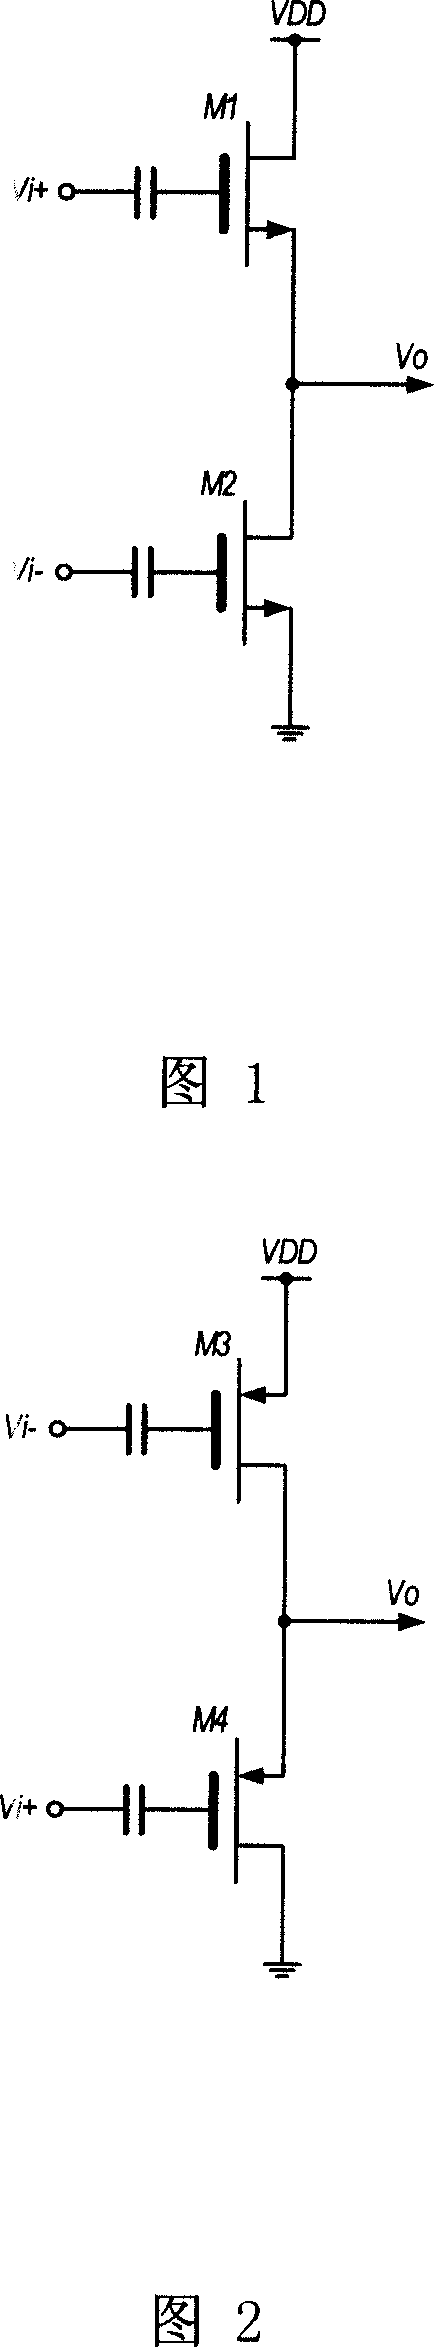 Radio-frequency differential-to-single-ended converter